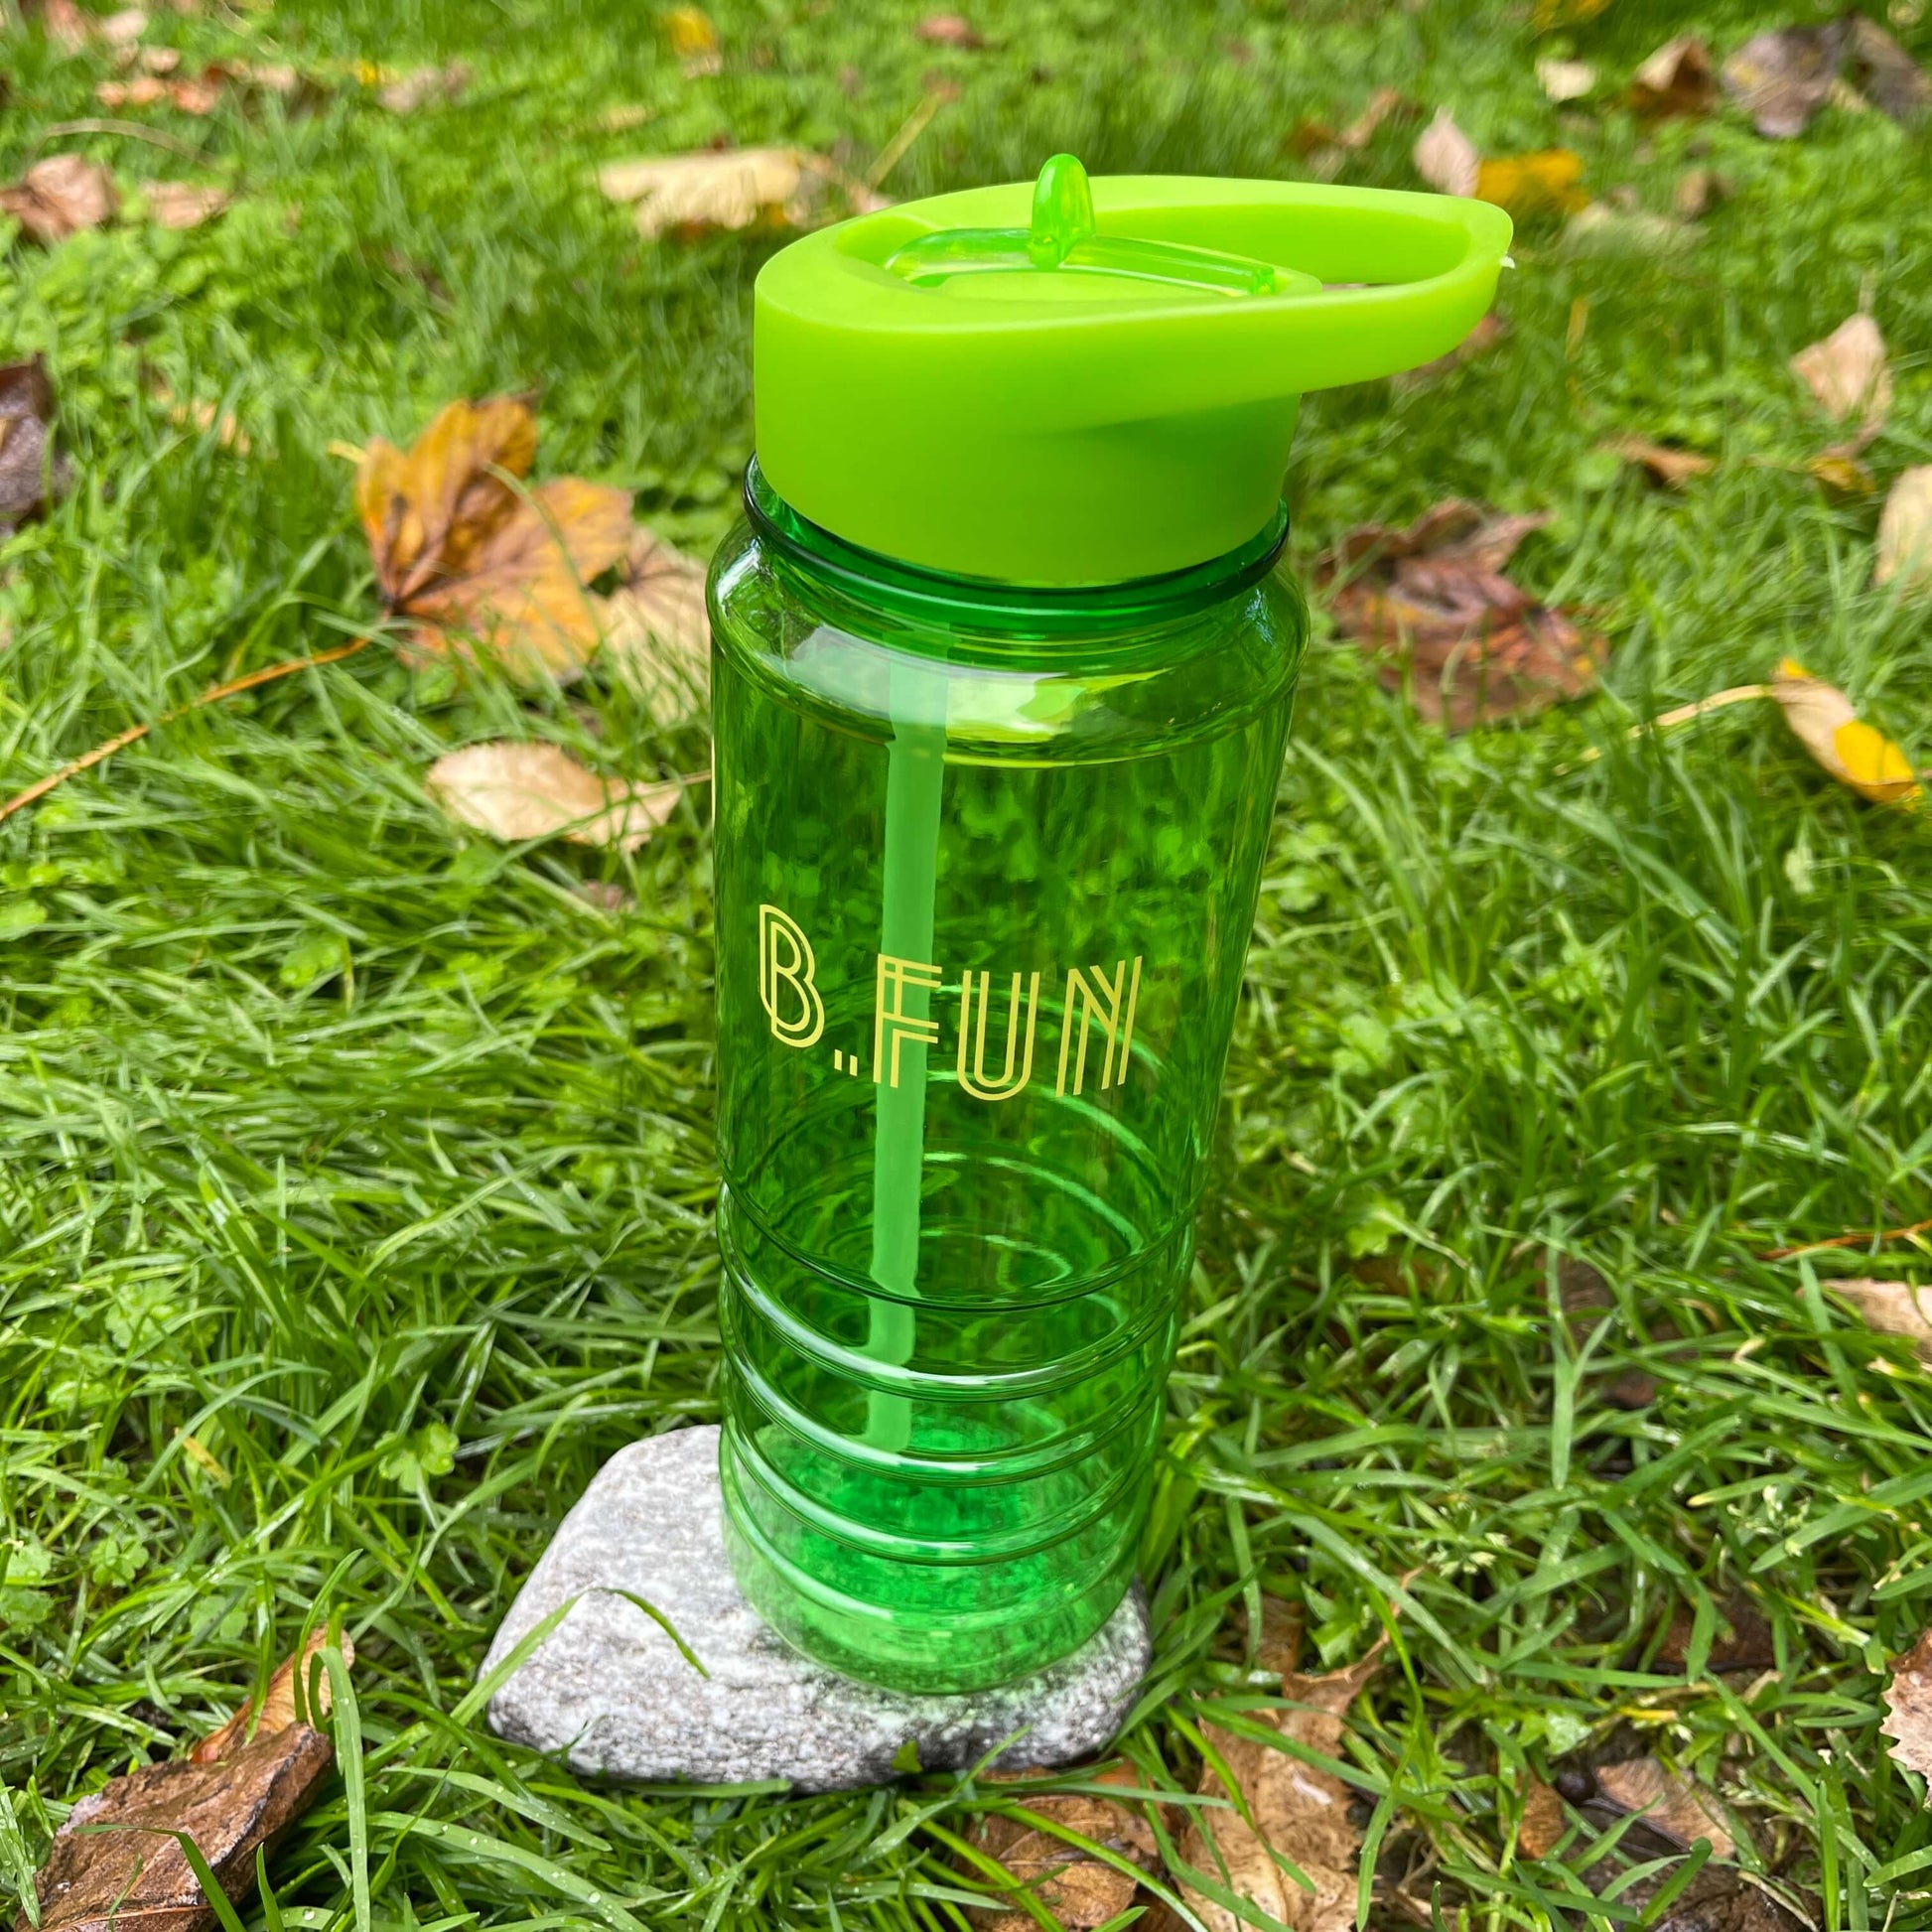 Bright green plastic sports water bottle with B=Fun printed on it sitting on a rock in the grass.